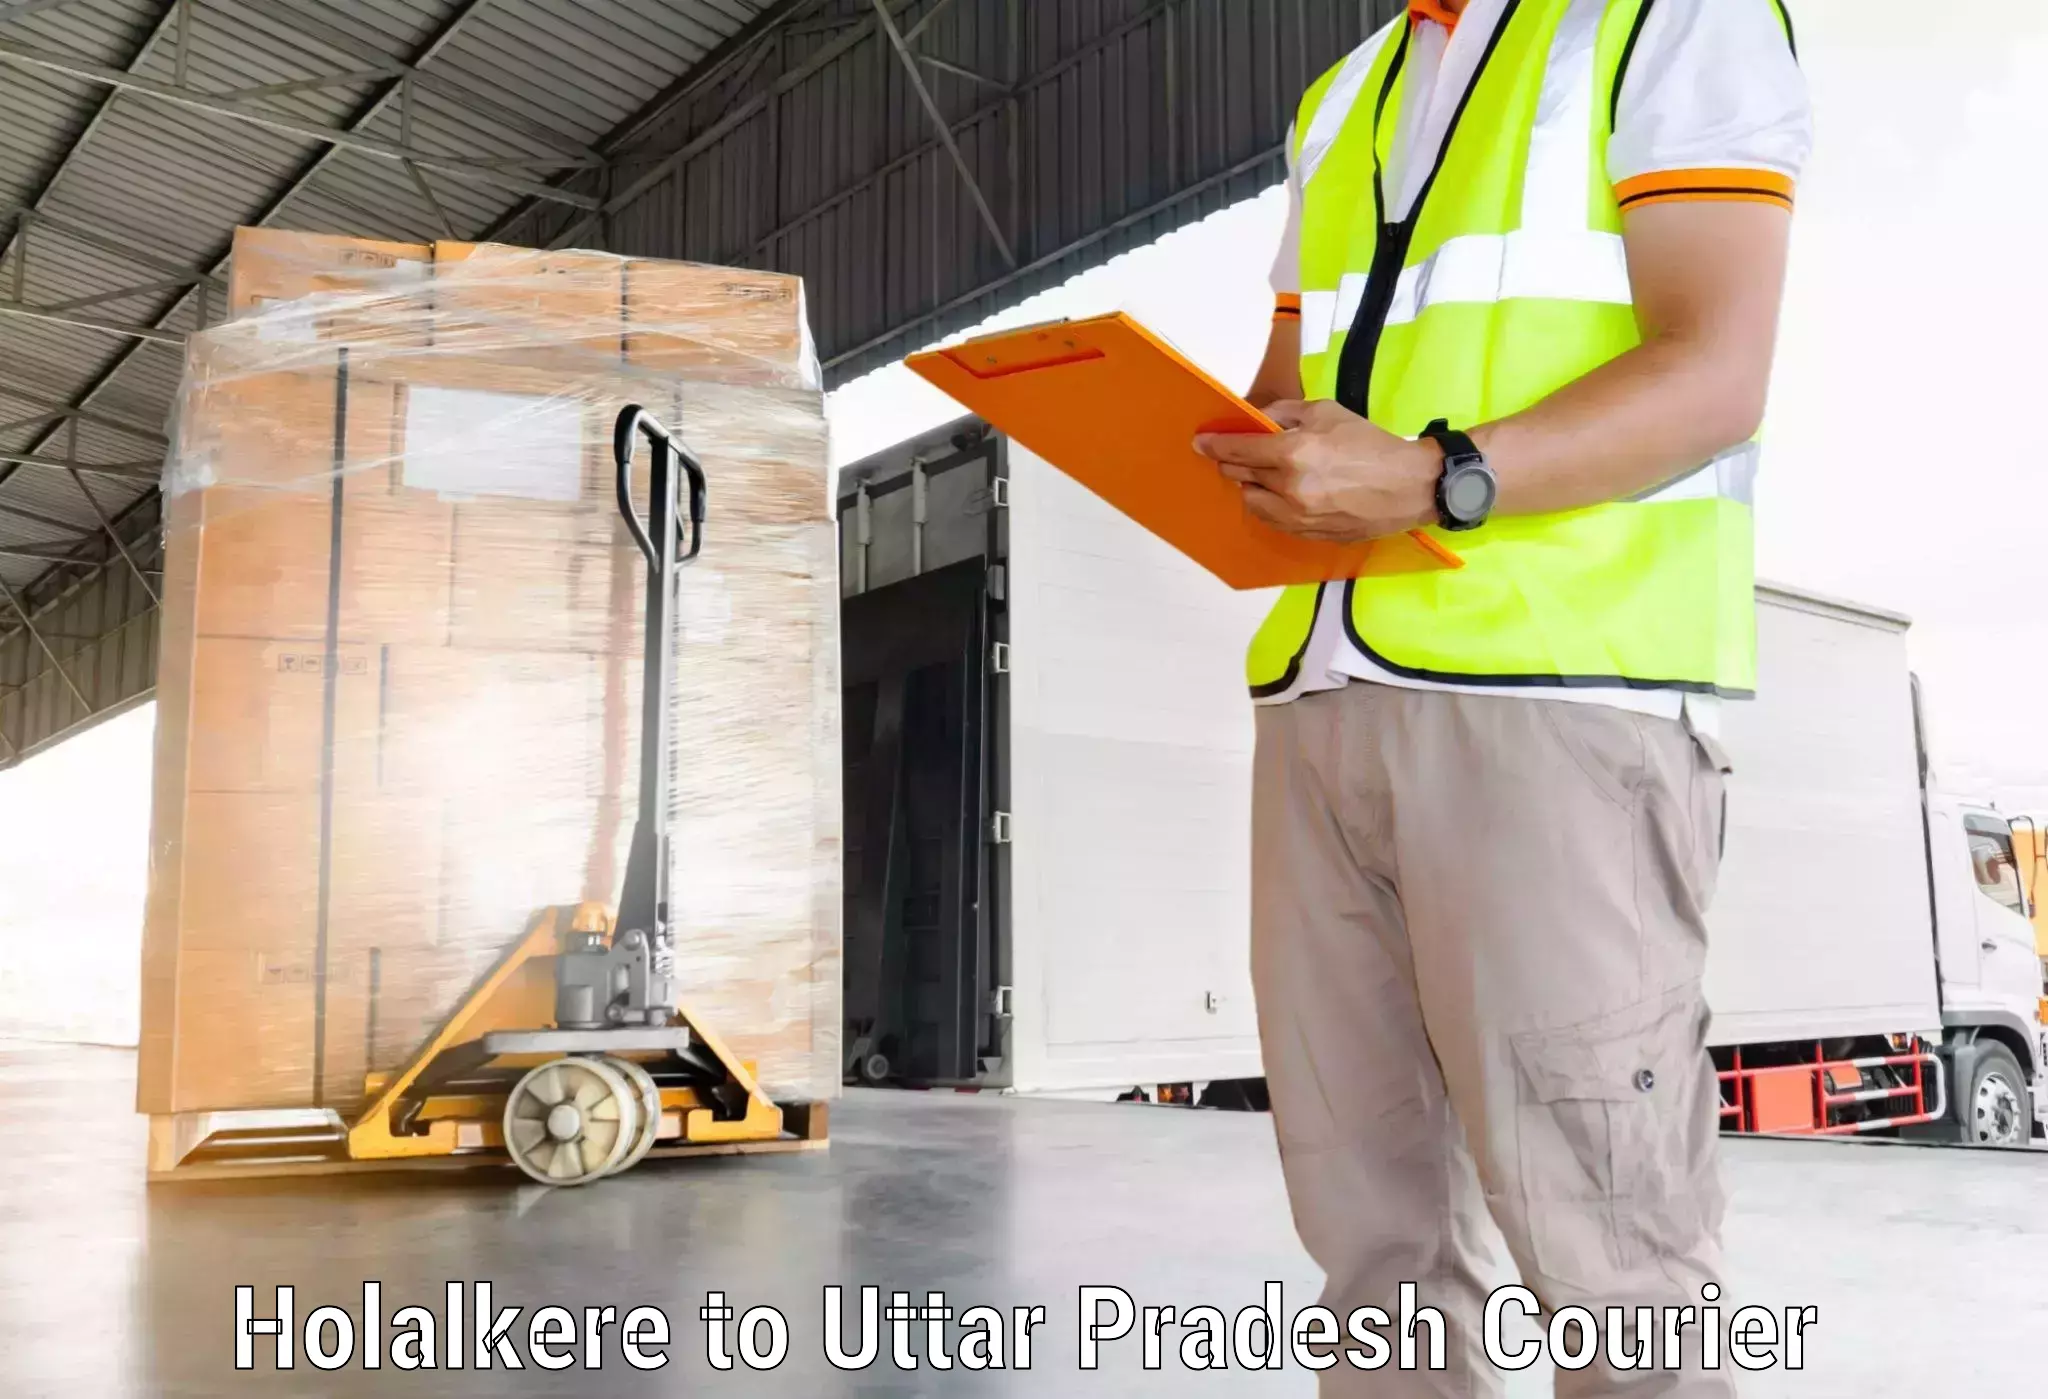 Online shipping calculator Holalkere to Jhansi